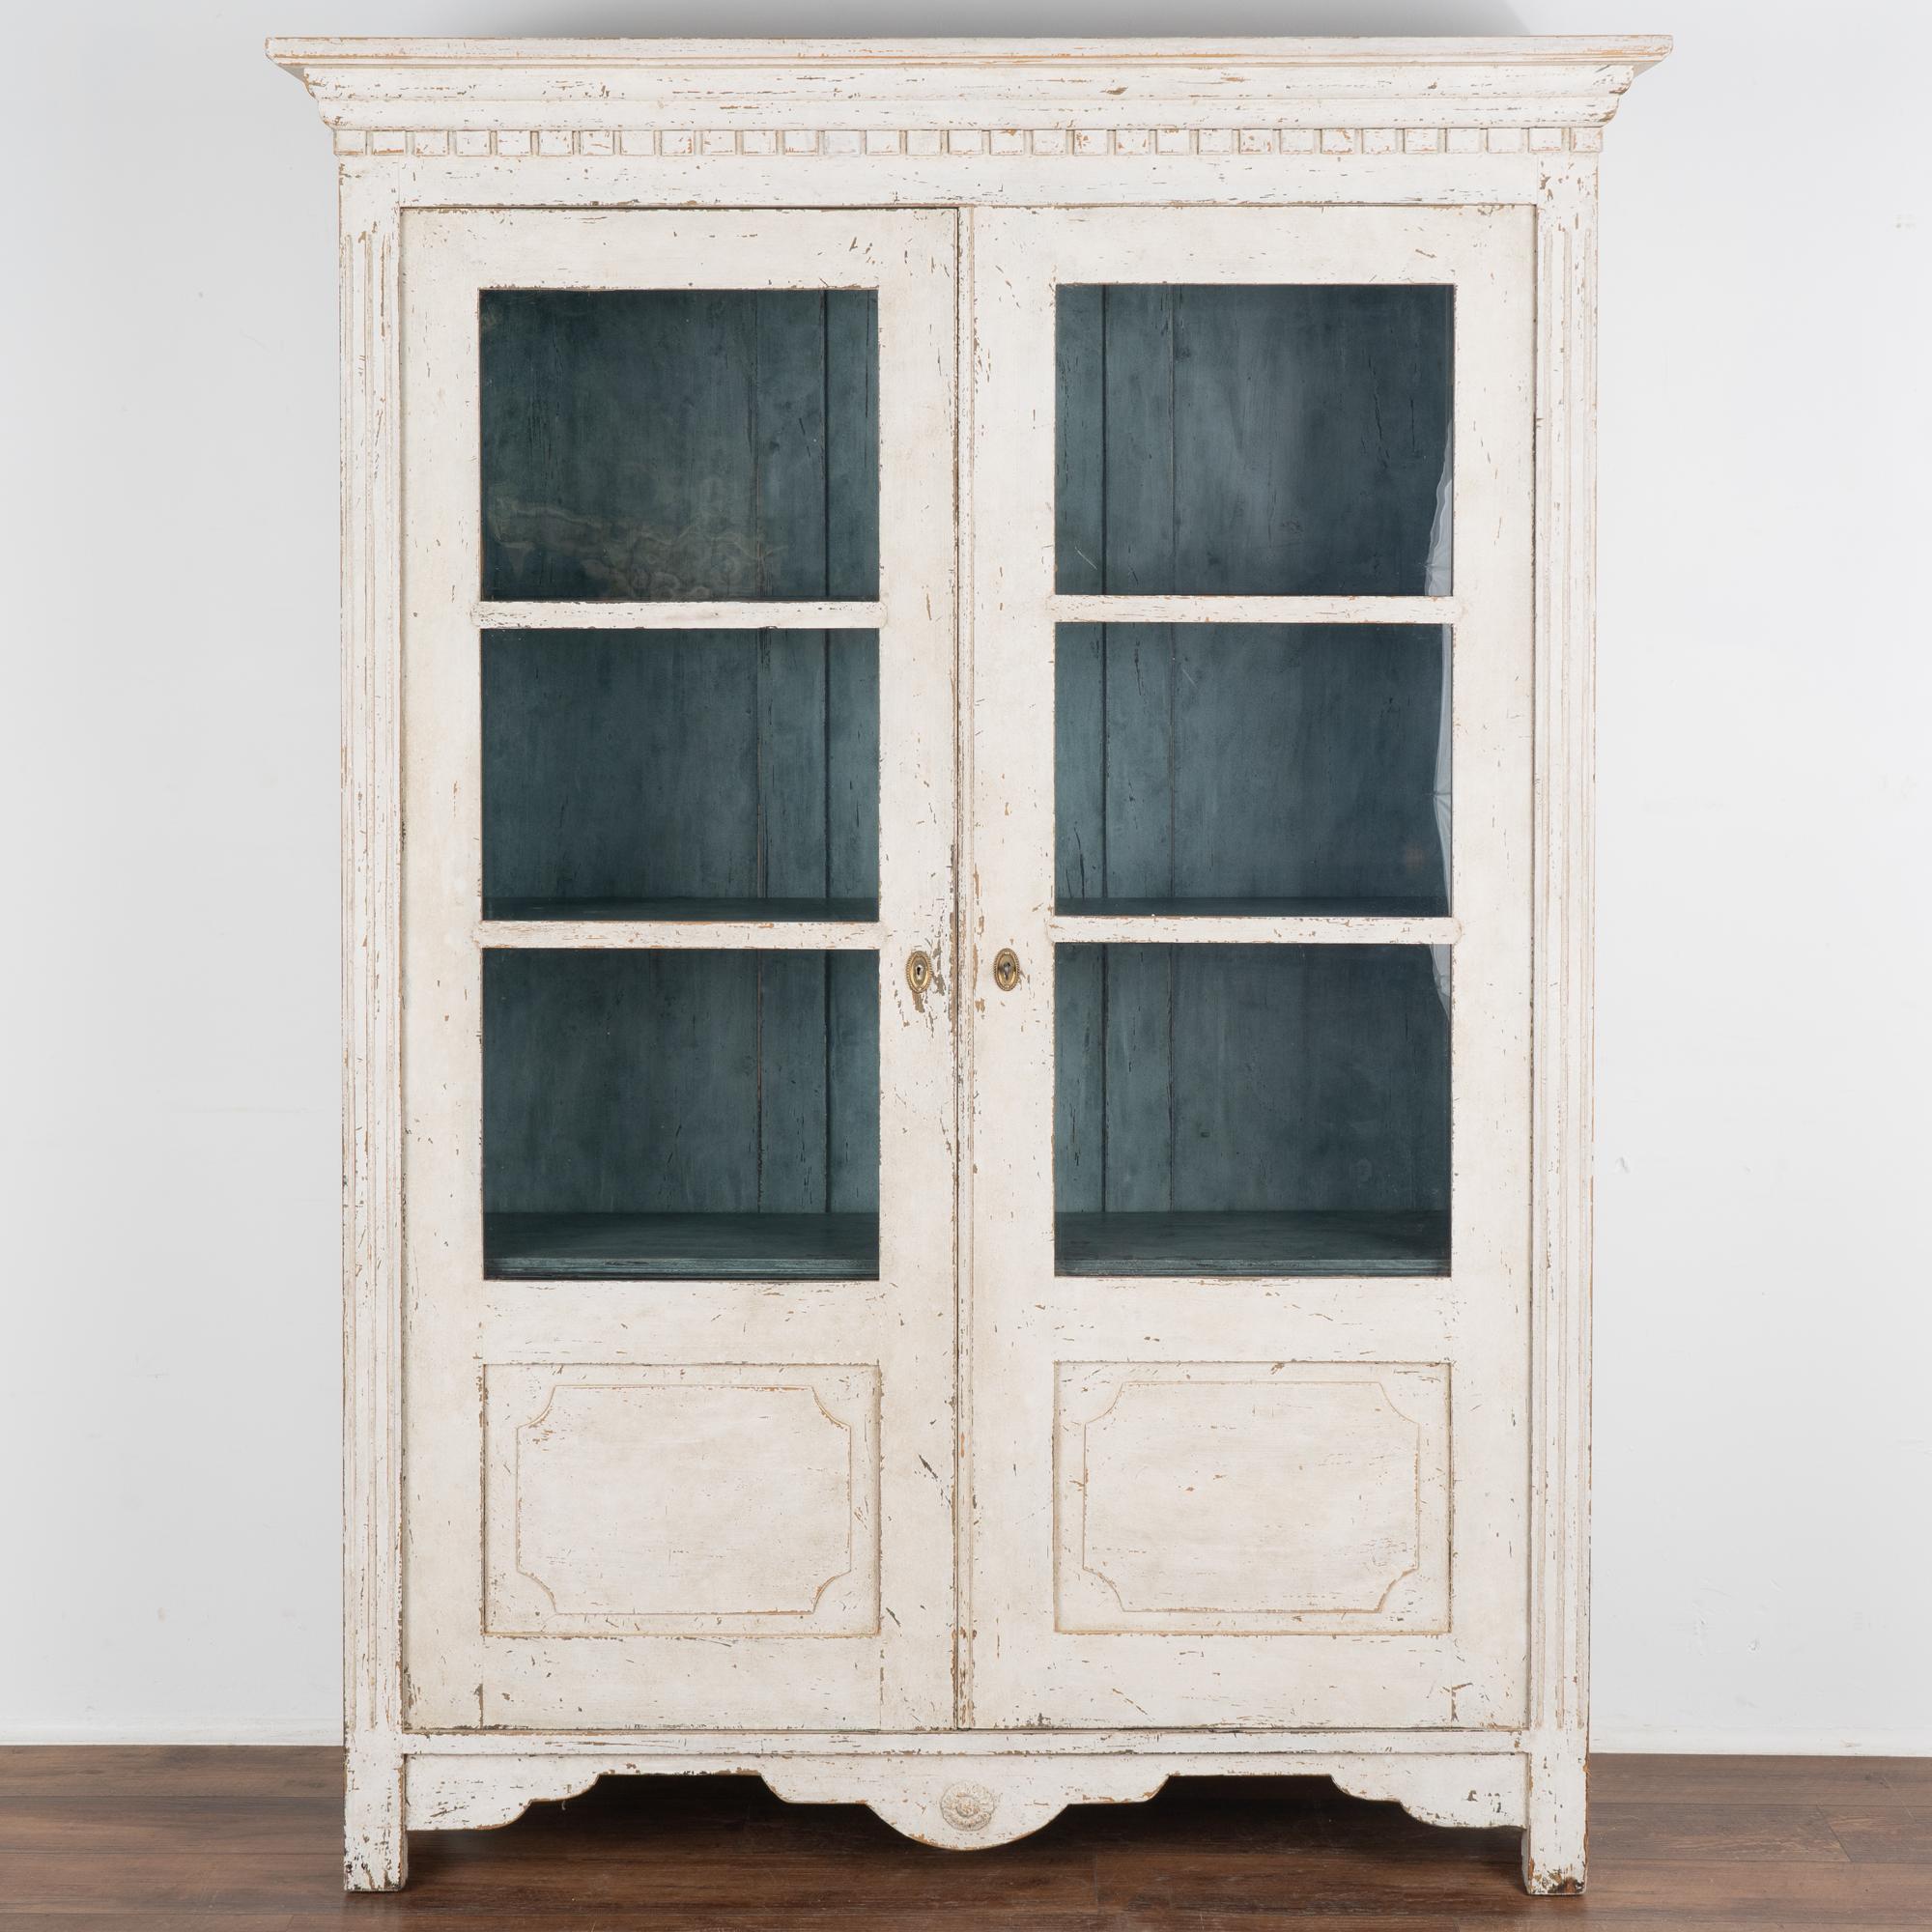 Swedish White Painted Bookcase Display Cabinet, Sweden circa 1820-40